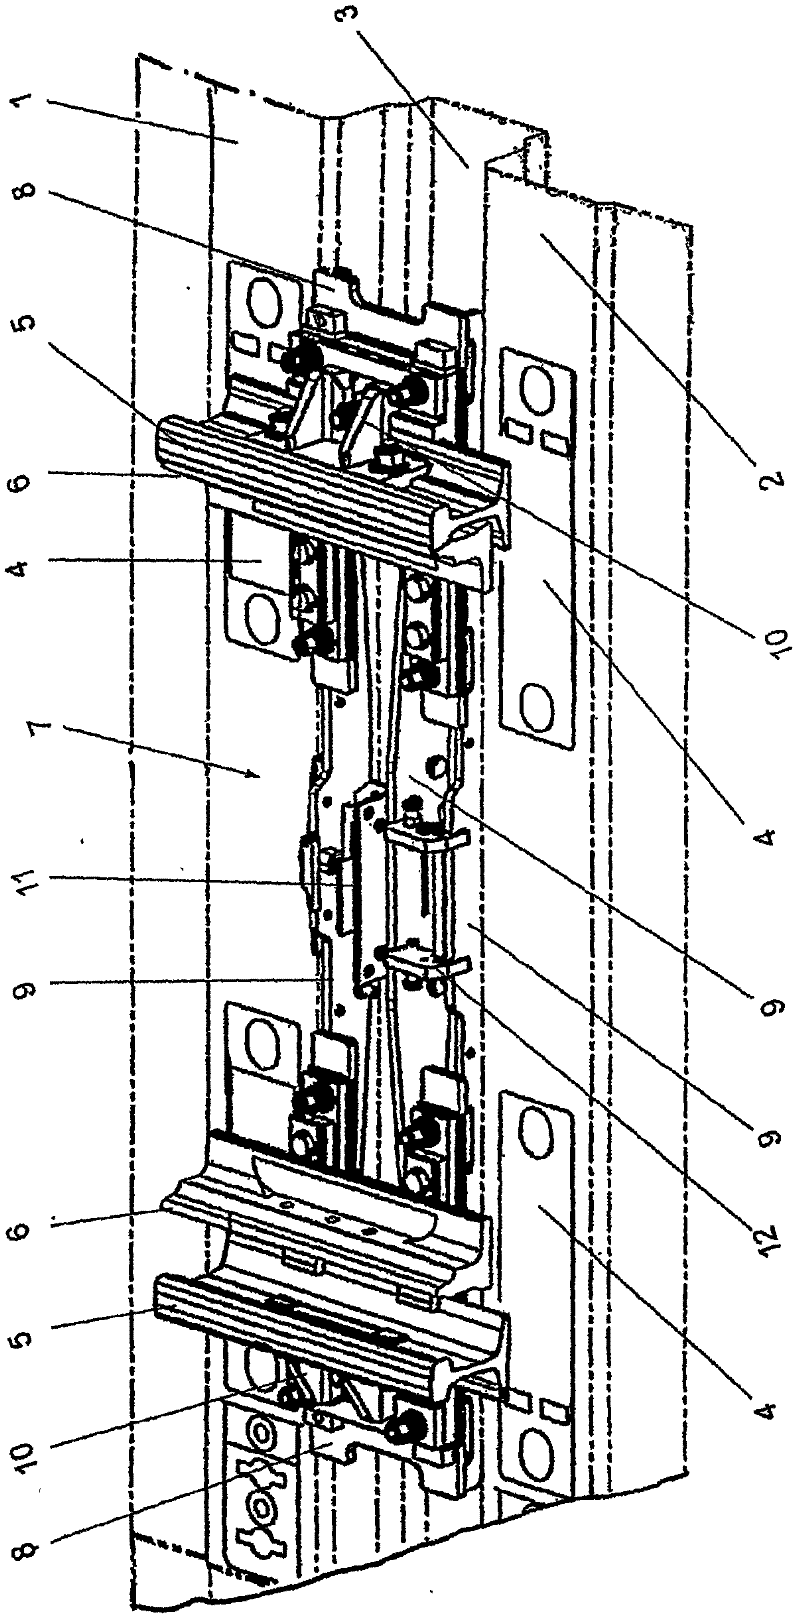 Apparatus for fixing a switching device on stock rails of a switch